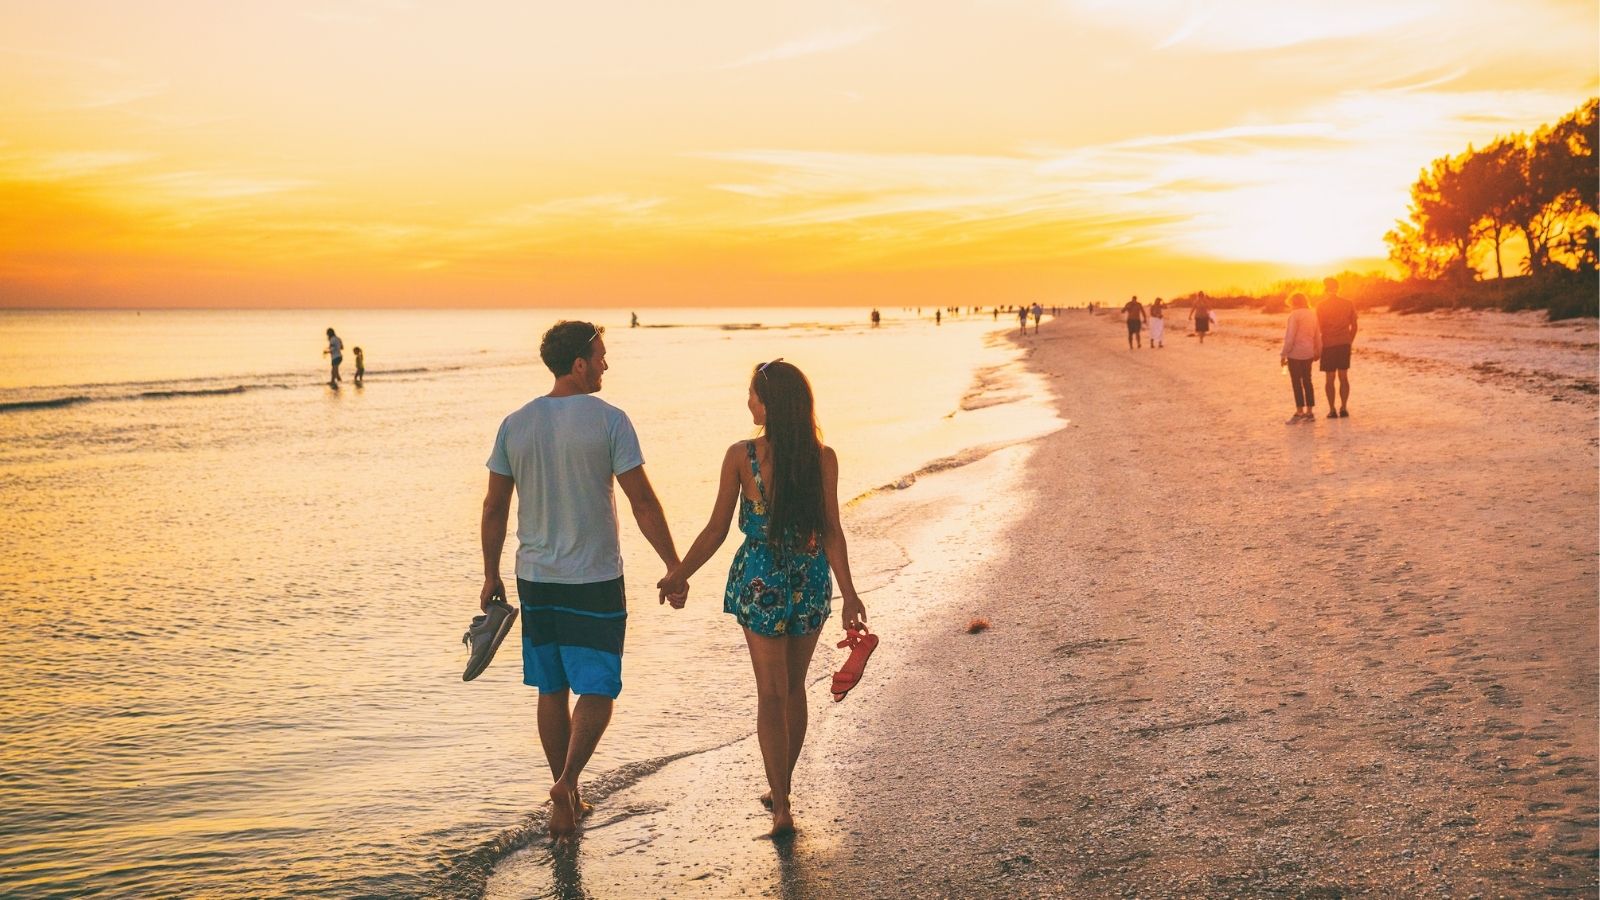 Couple walking together on one of their best family beach vacations (Photo: Shutterstock)